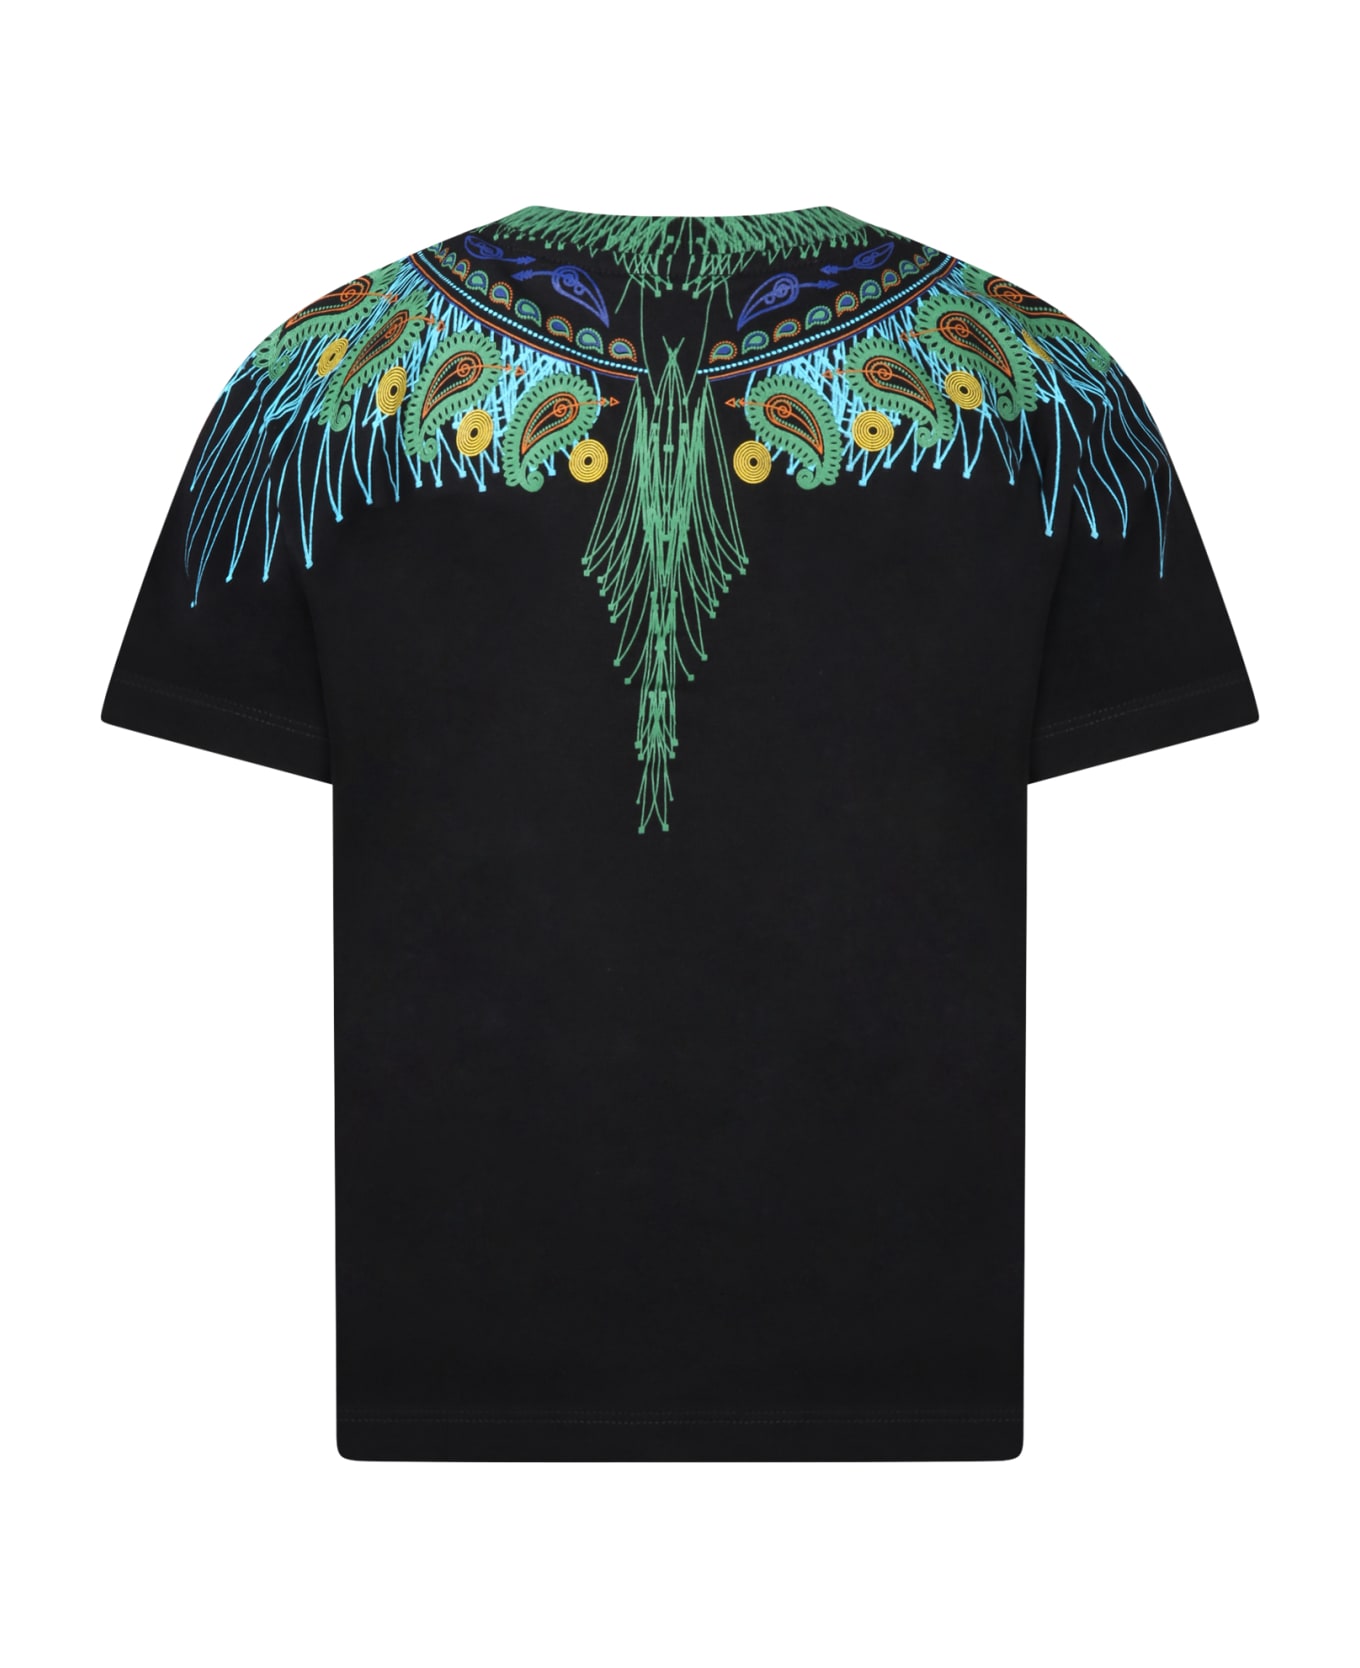 Marcelo Burlon Black T-shirt For Kids With Iconic Wings - Black